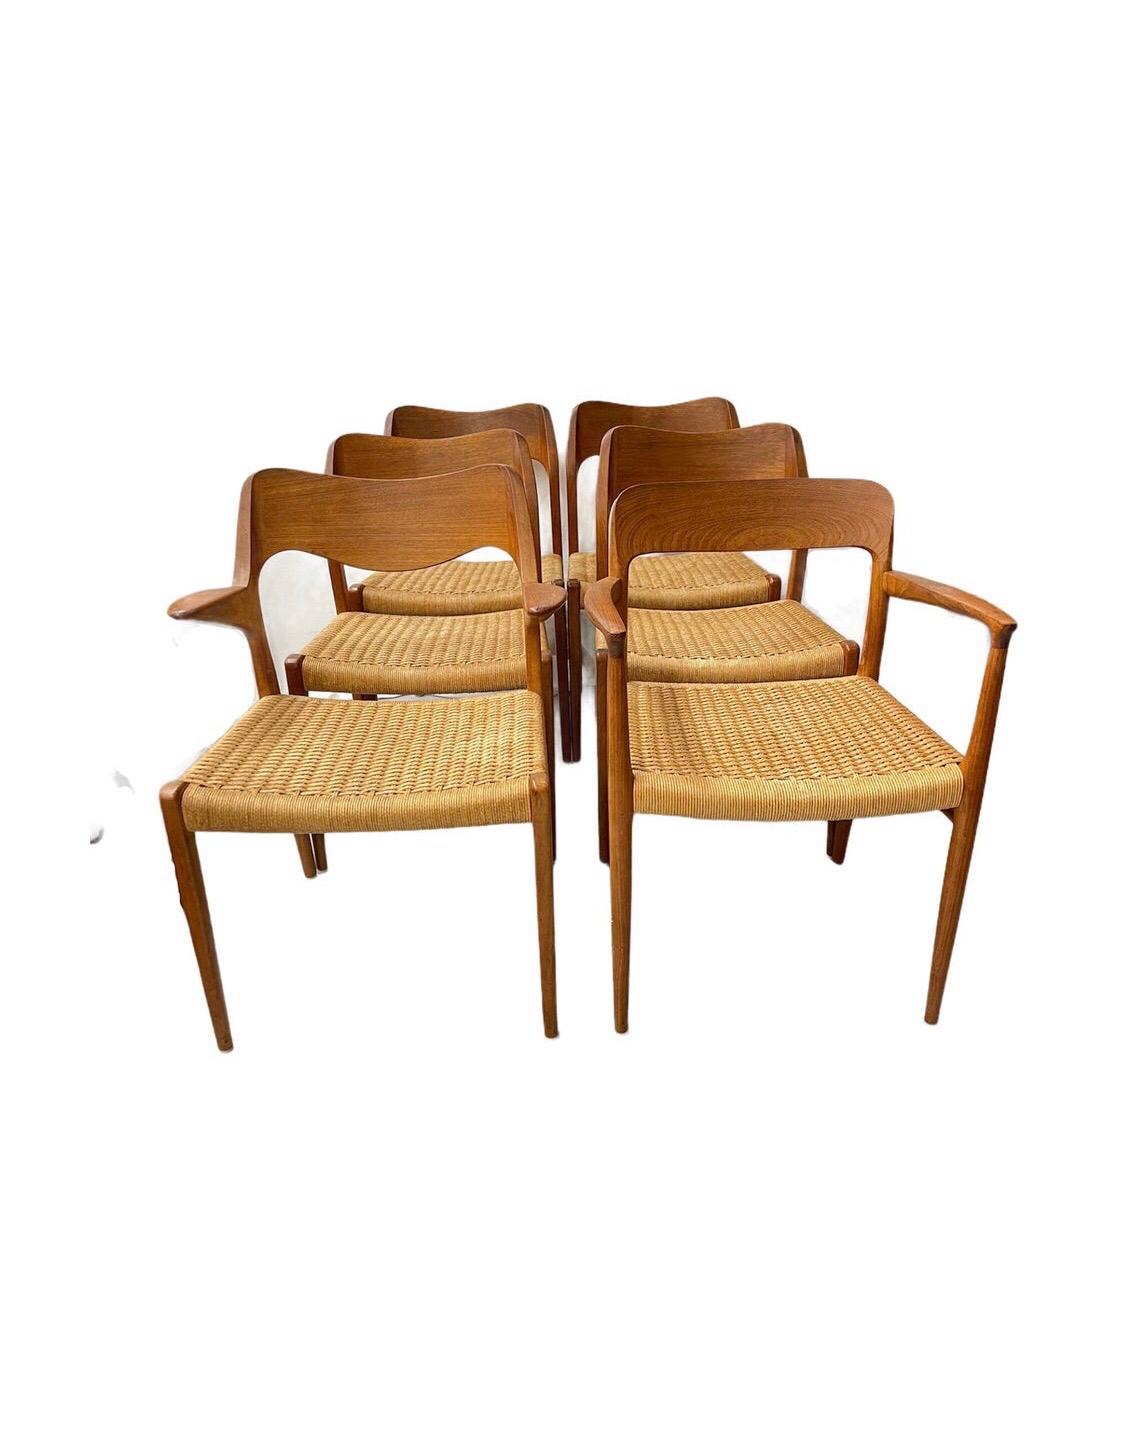 Mid-Century Modern 1960s Danish Modern Jl Moller Chairs with Caning, Set of 6